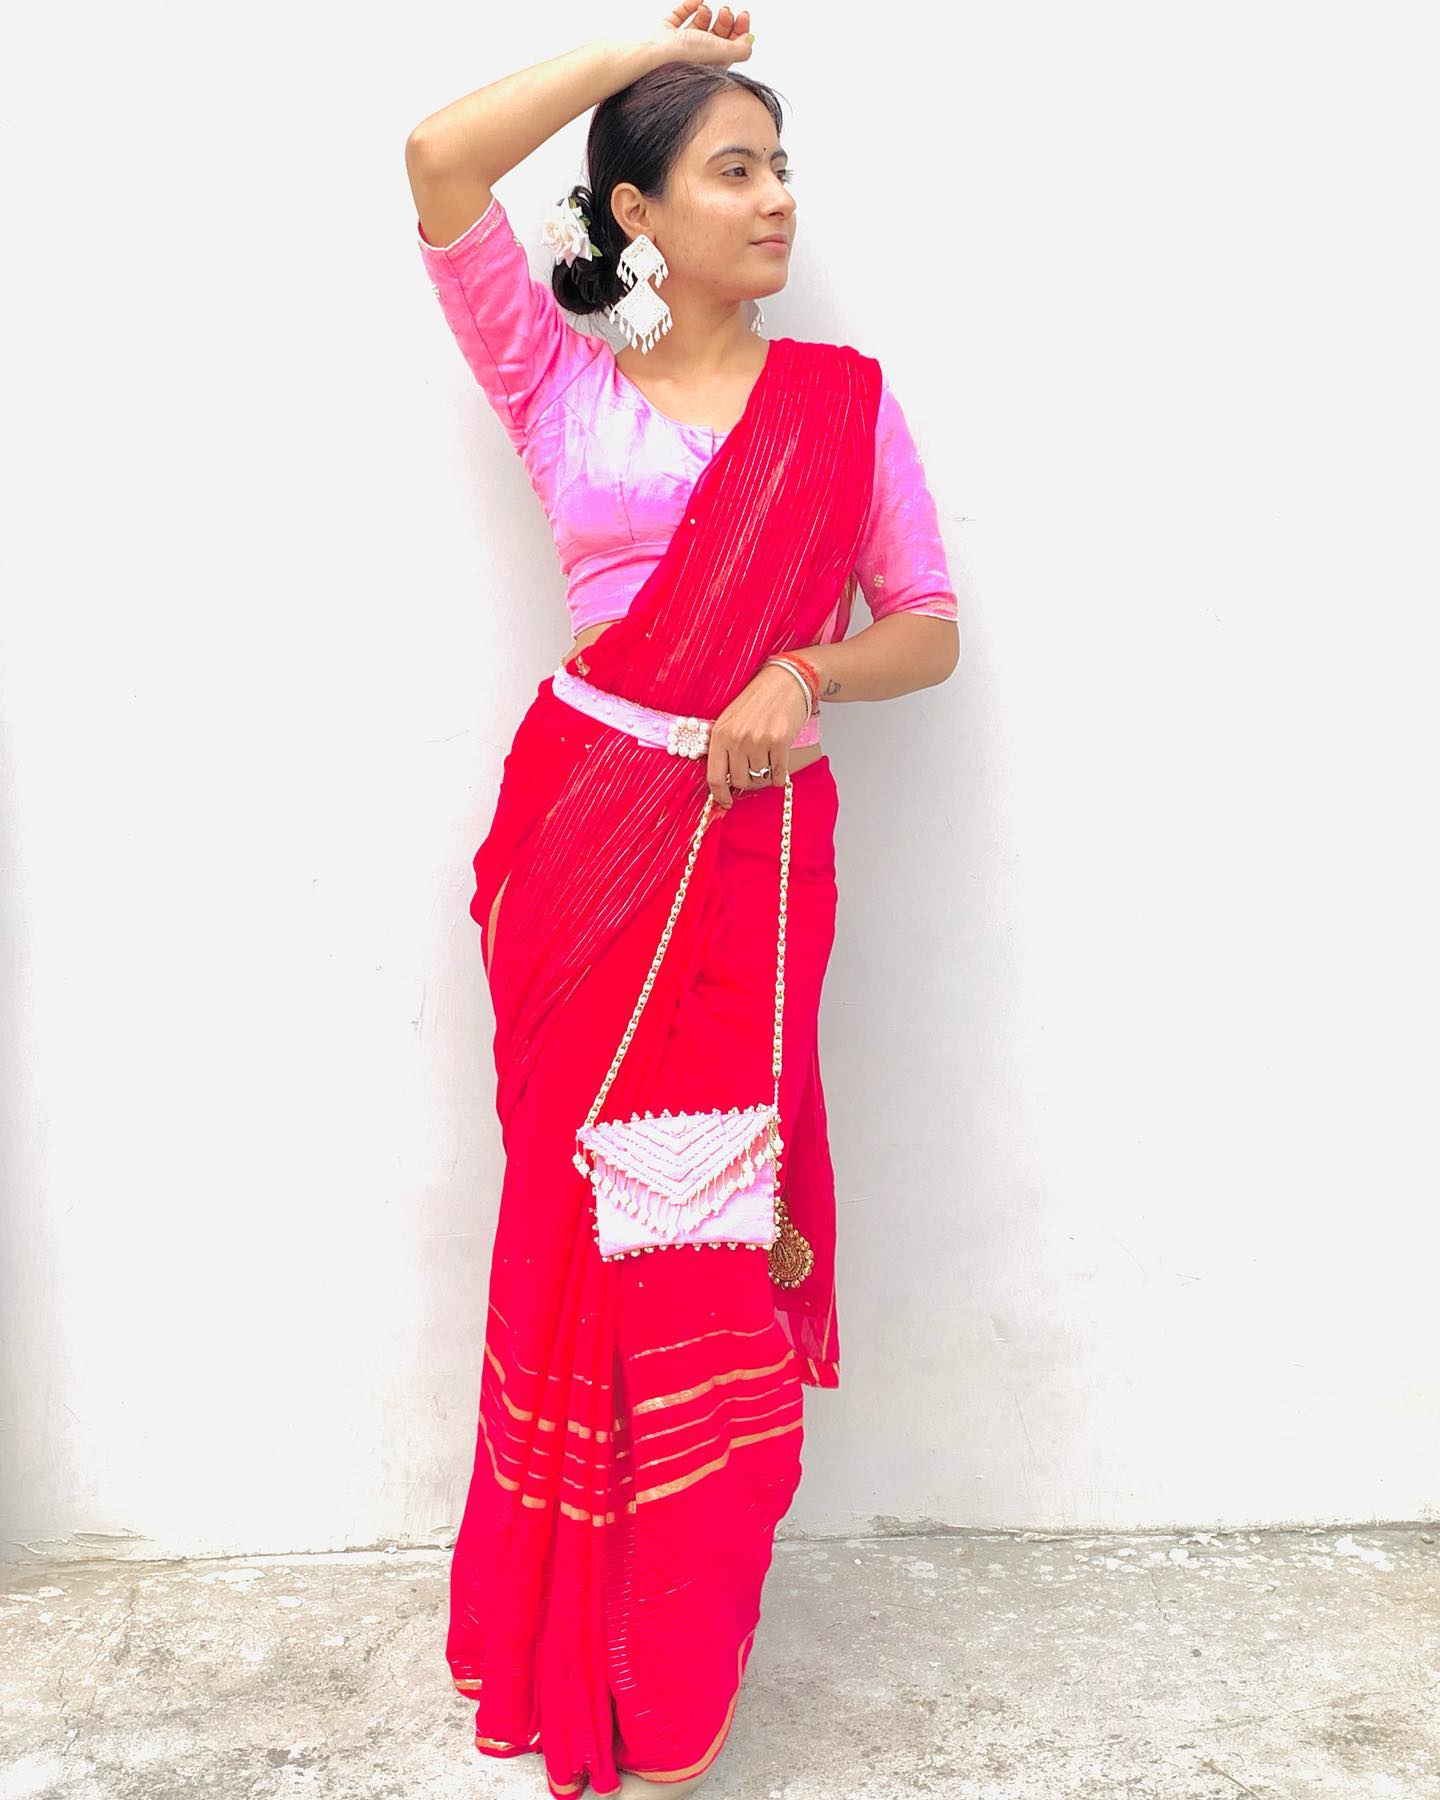 11 Ideas on How to Reuse Old Sarees to Make New Outfits